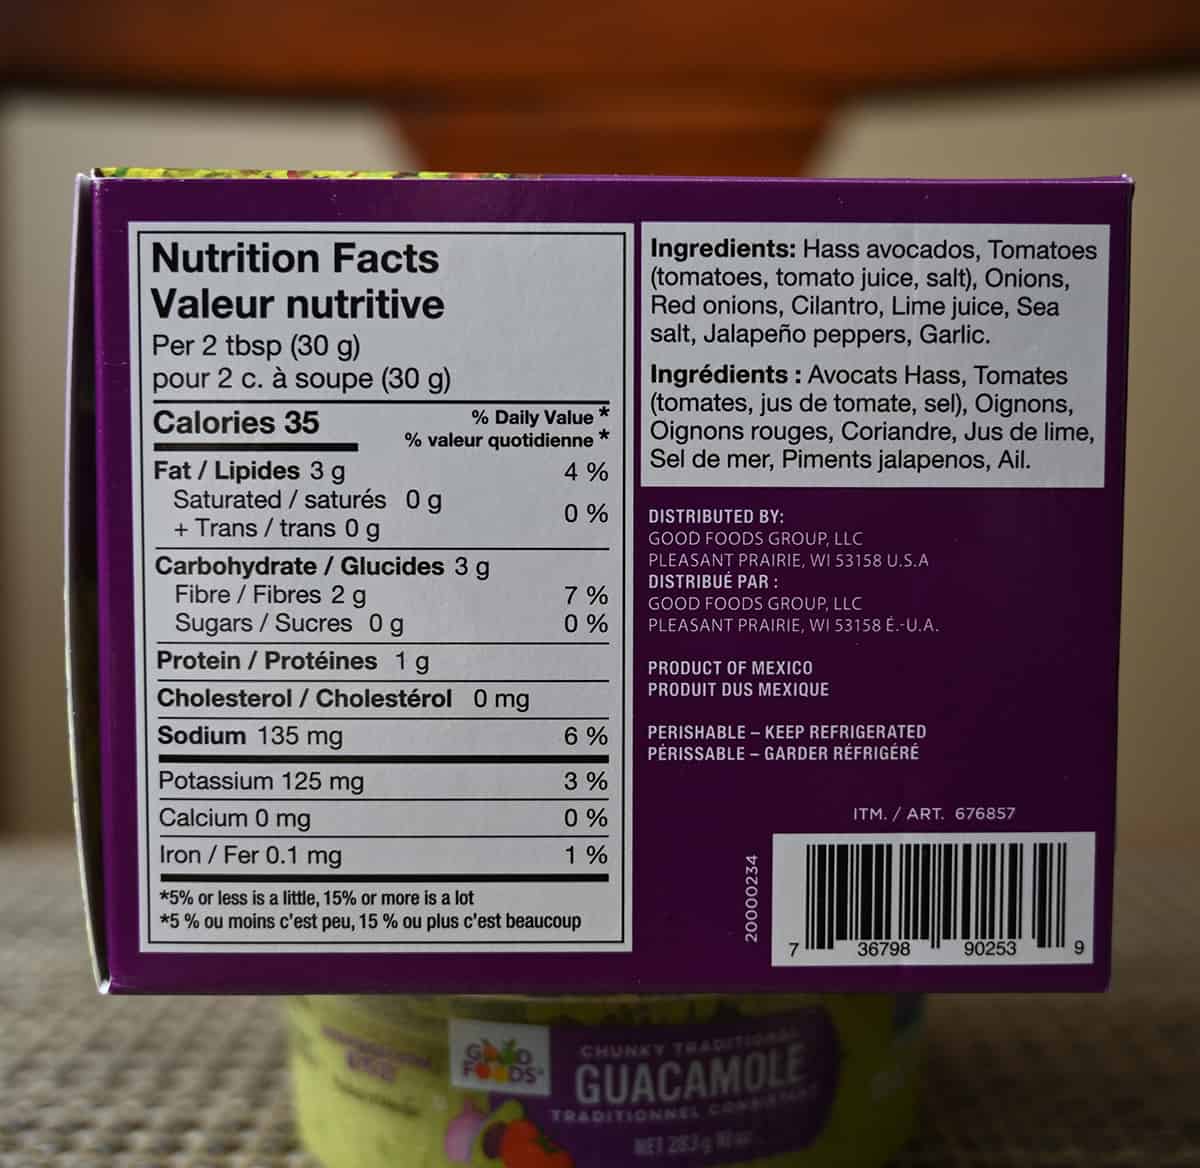 Image of the back of the package of guacamole showing ingredients, nutrition facts and that it's a product of mexico.